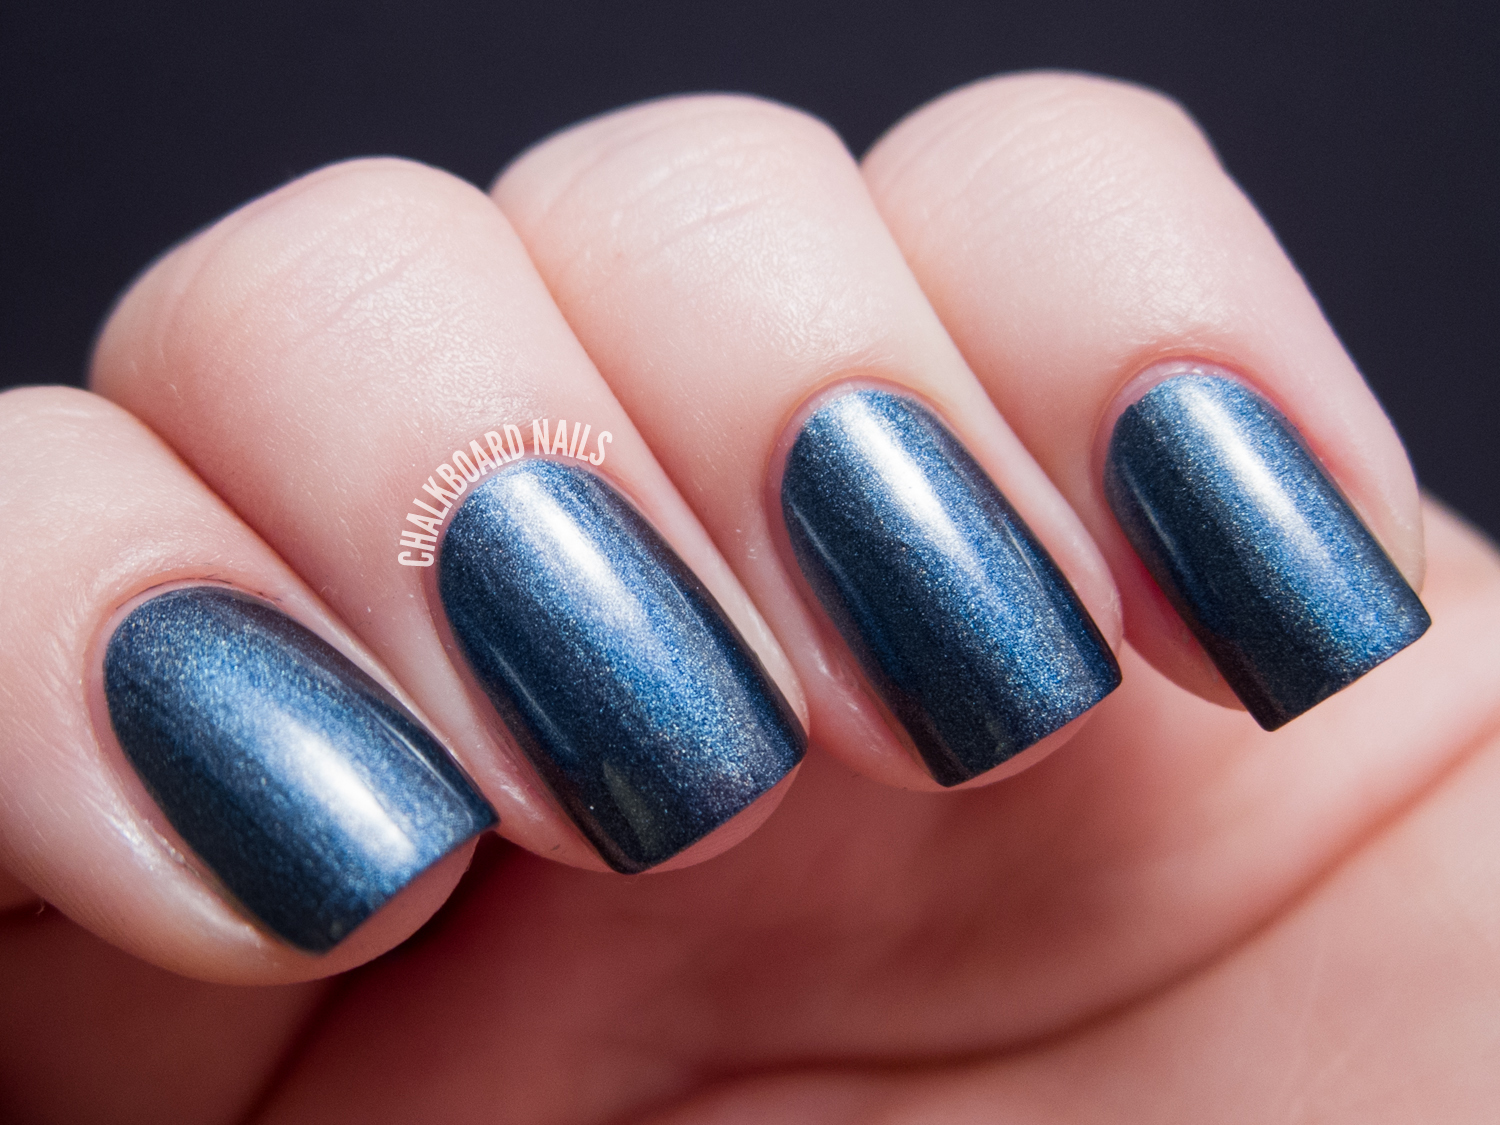 China Glaze Hologlam Collection Strap On Your Moonboots nail polish